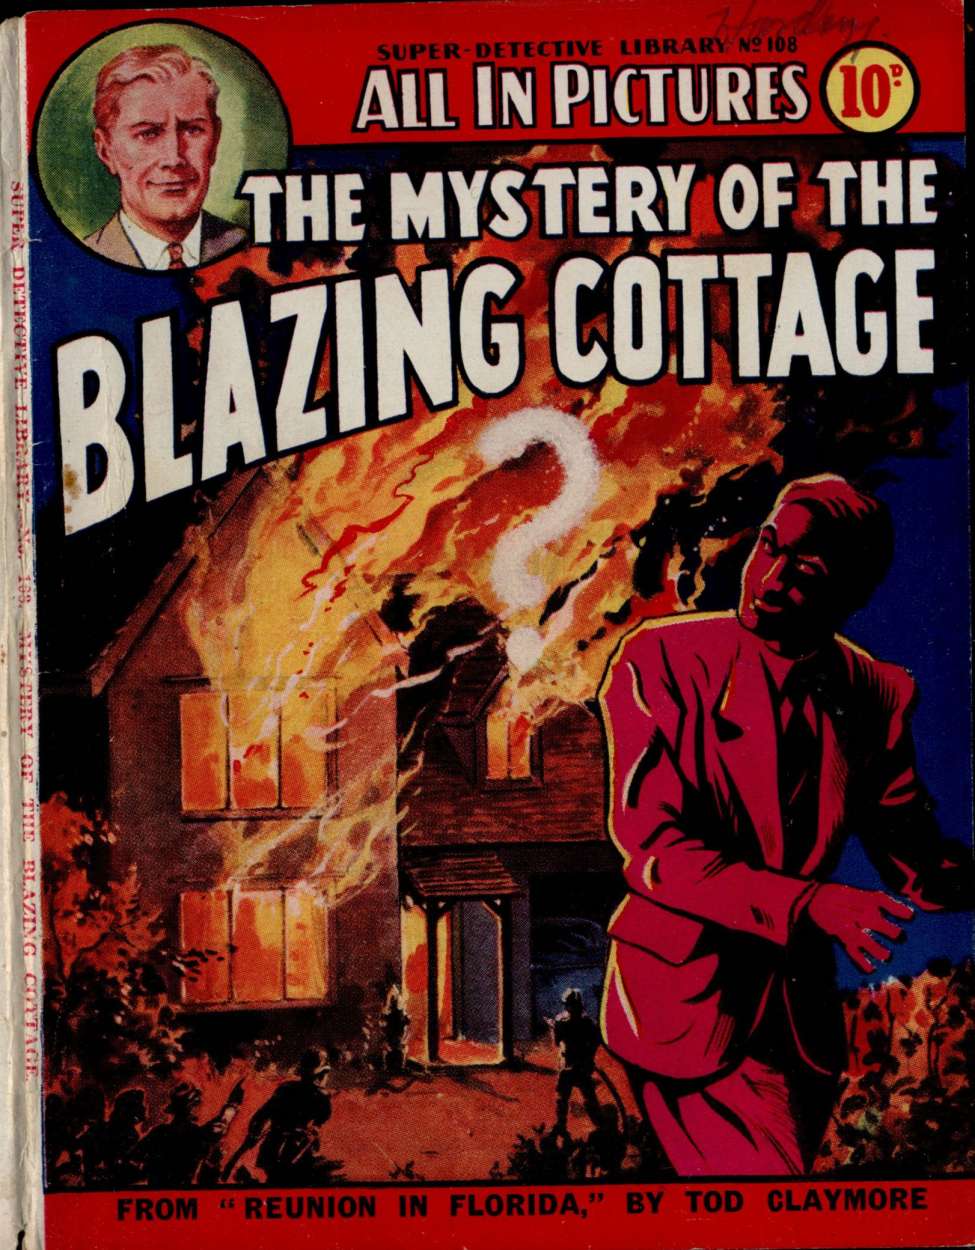 Book Cover For Super Detective Library 108 - The Mystery of the Blazing Cottage